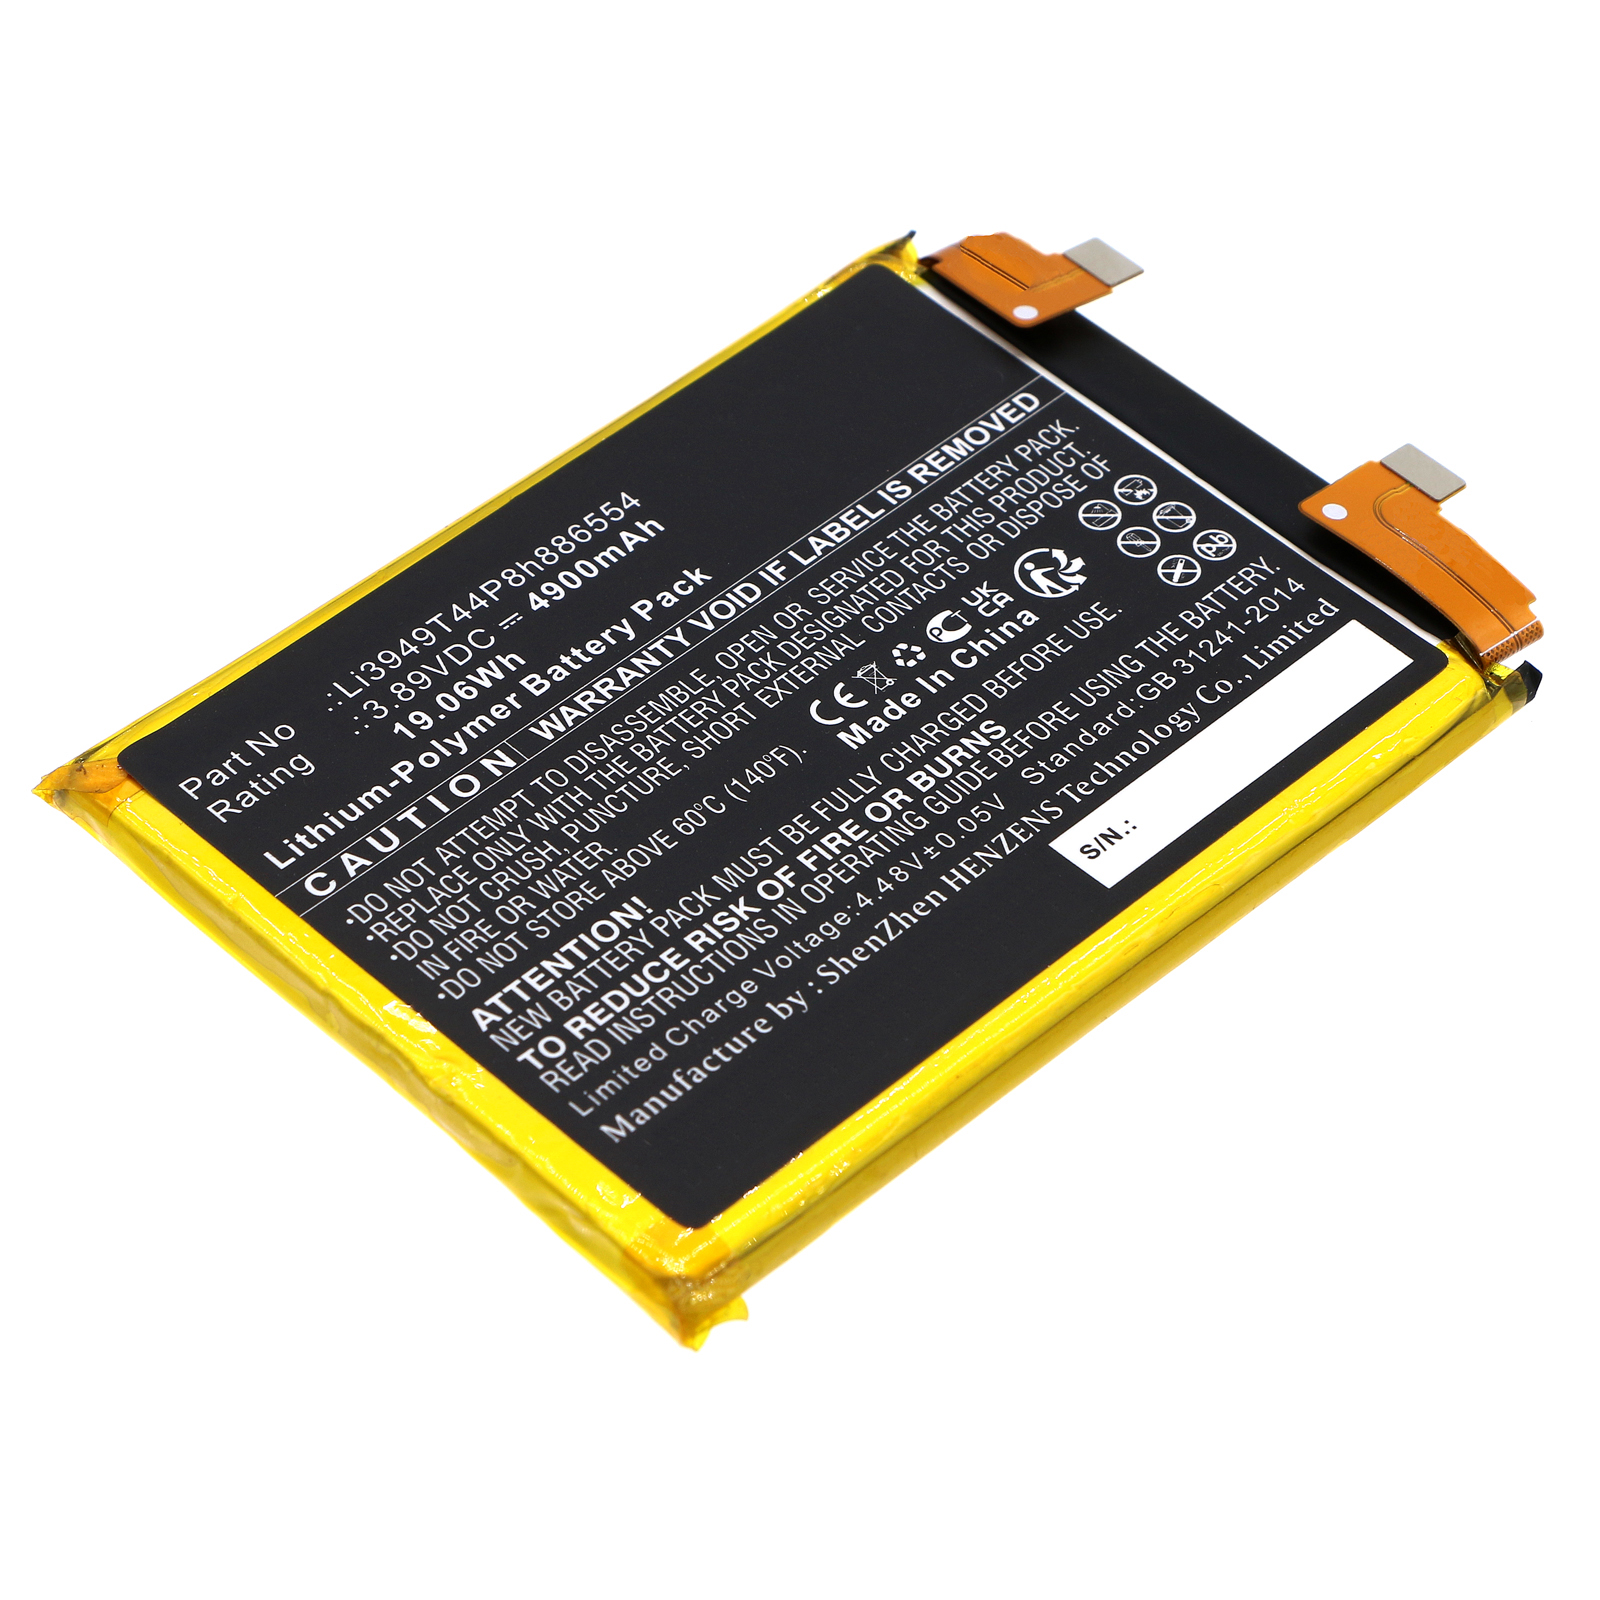 Synergy Digital Cell Phone Battery, Compatible with ZTE Li3949T44P8h886554 Cell Phone Battery (Li-Pol, 3.89V, 4900mAh)